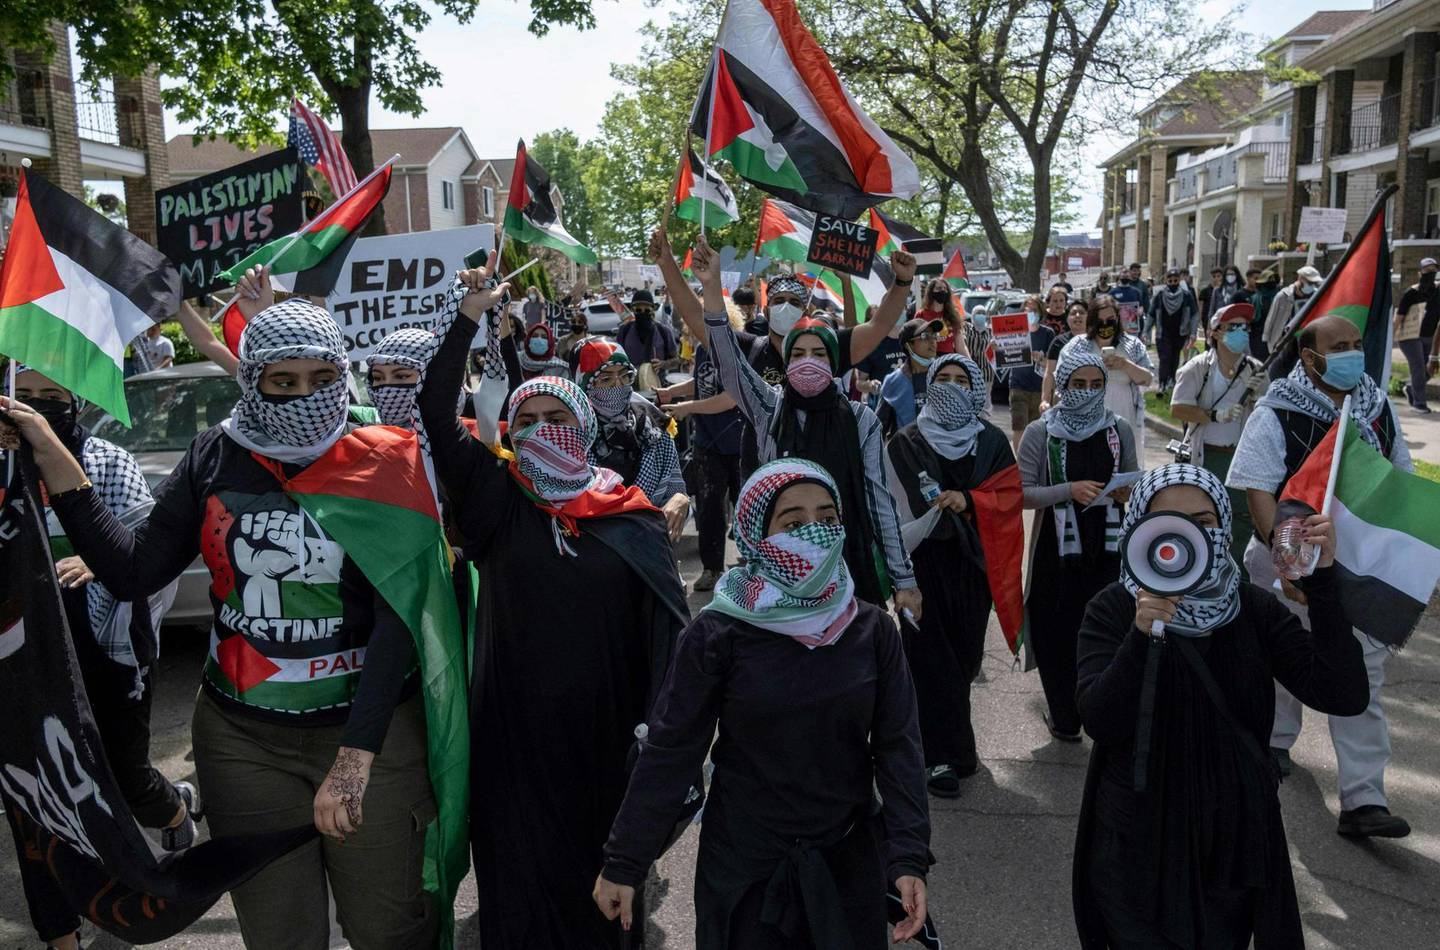 Protesters march through neighborhoods near a Ford Motor Company plant in Dearborn, Michigan on May 18, 2021, where US President Joe Biden is touring, to protest the Biden's continued support for Benjamin Netanyahu's administration, and the on going Israeli army actions in Gaza, and the forced removal of Palestinian families in Sheikh Jarrah in East Jerusalem.  US President Joe Biden, having resisted joining other world leaders and much of his own Democratic party in calling for an immediate end to hostilities, told Netanyahu Monday night he backs a ceasefire, but stopped short of demanding a truce. / AFP / SETH HERALD
